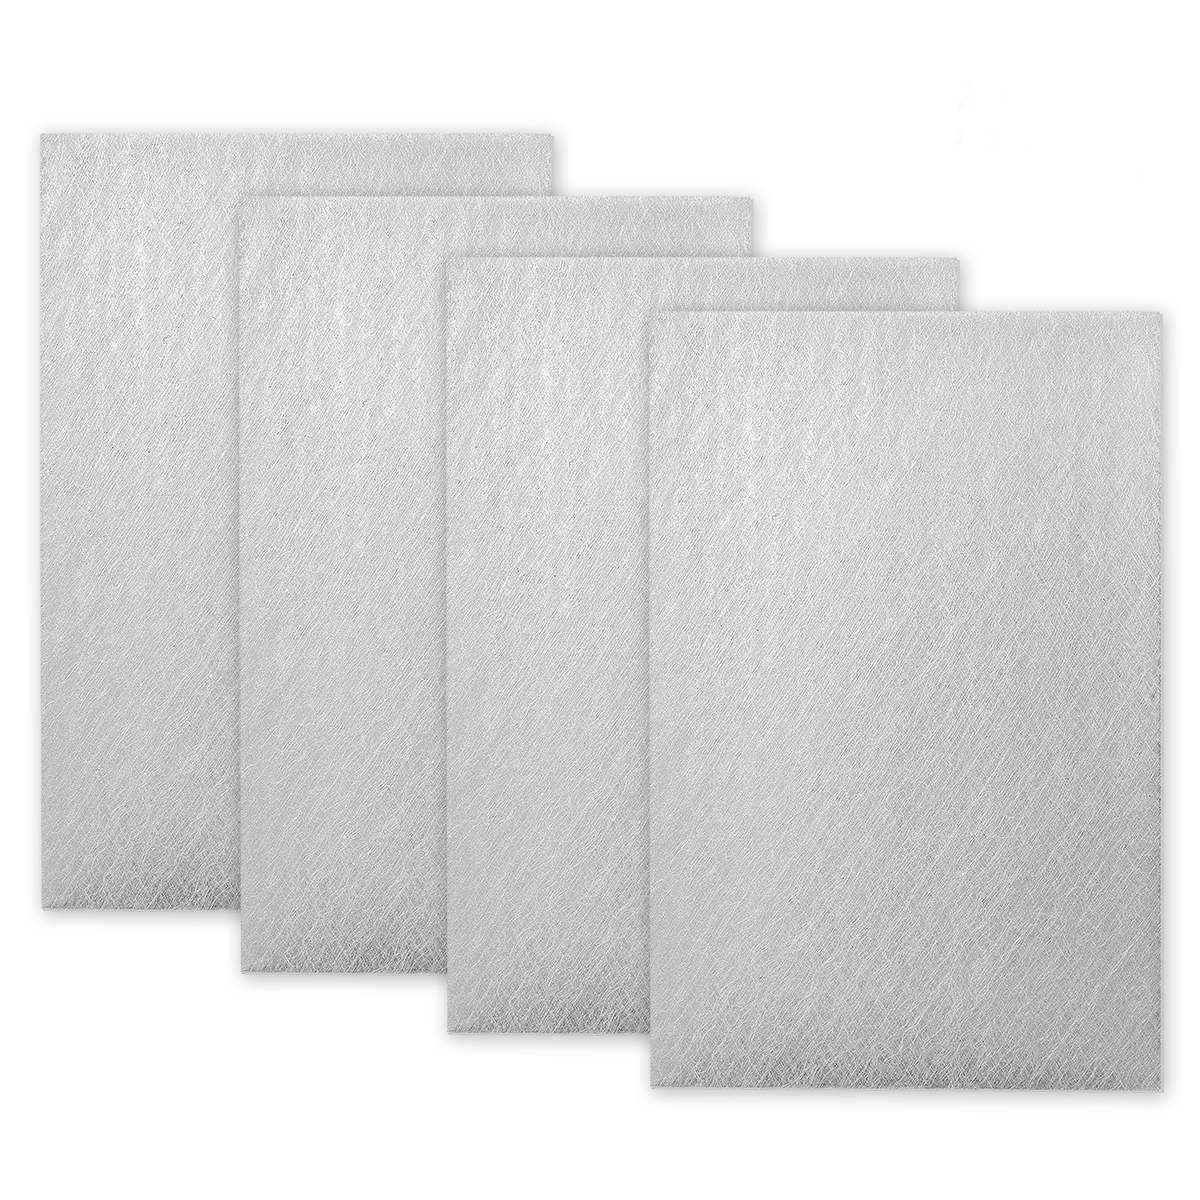 Original Replacement Filter Media For Viking DefendRx 1000 1" 4-PACK Genuine OEM with NO Carbon Insert